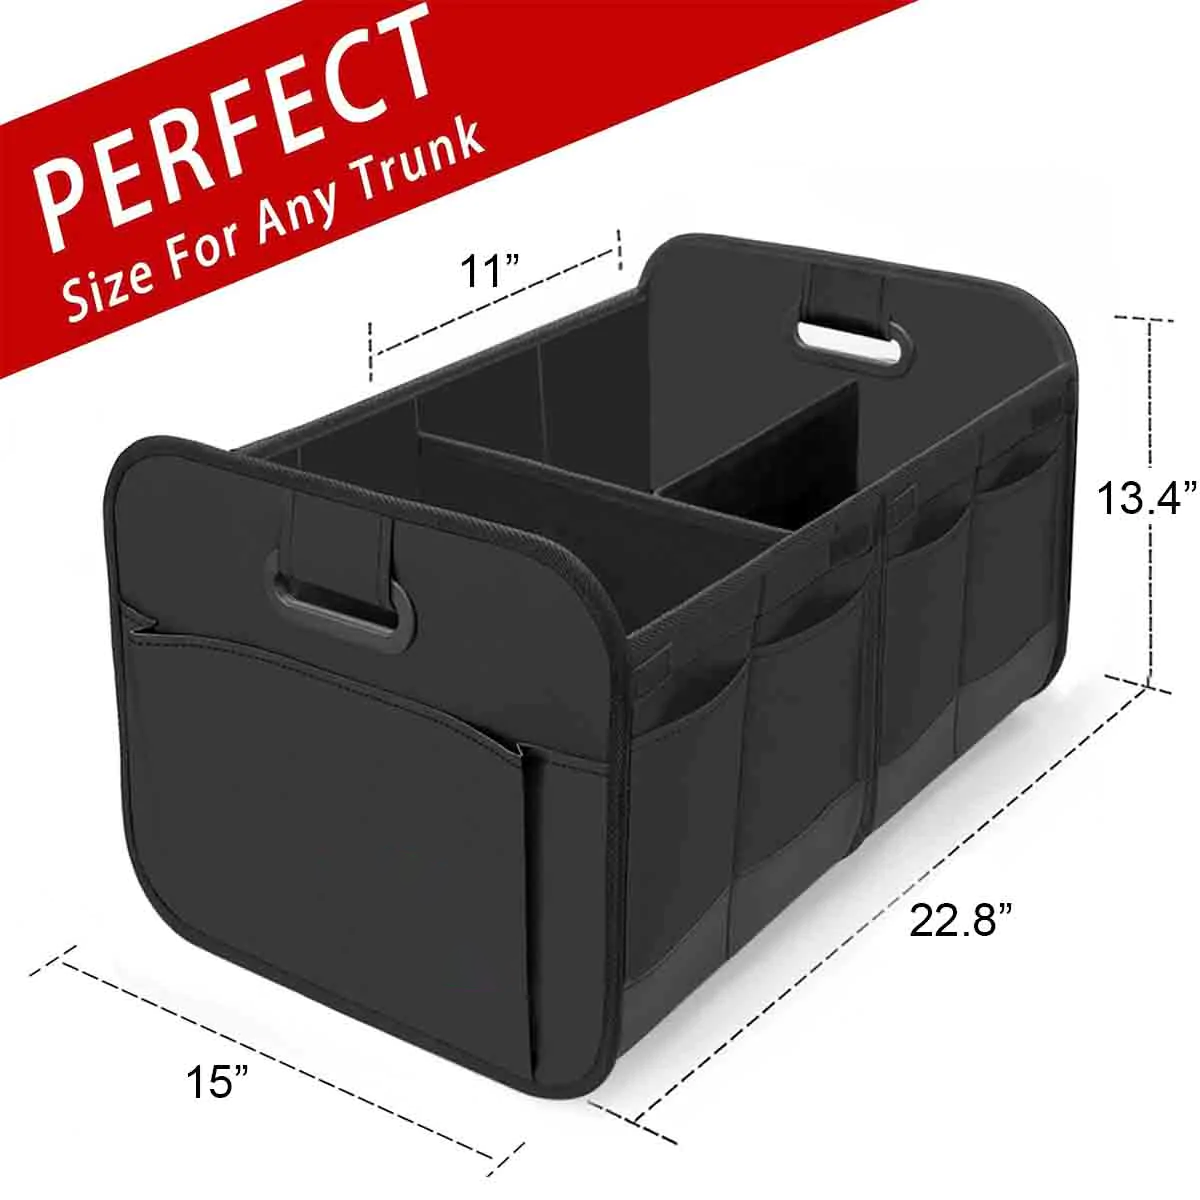 Custom Text For Car Trunk Organizer Storage, Compatible with All Cars, Reinforced Handles, Collapsible Multi, Compartment Car Organizers, Foldable and Waterproof, 600D Oxford Polyester UE12995